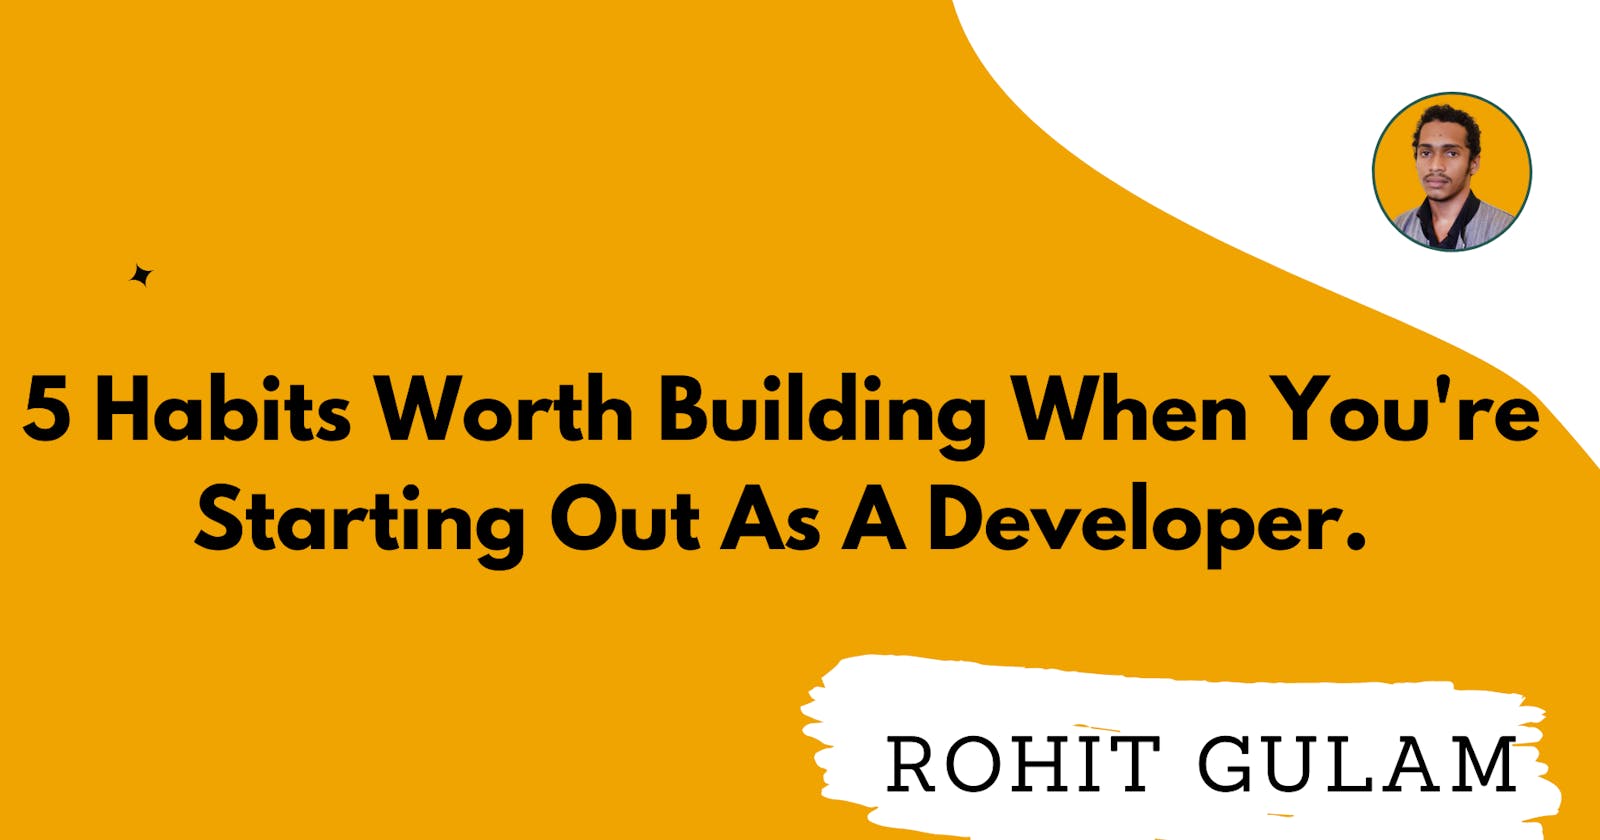 5 Habits Worth Building When You're Starting Out As A Developer